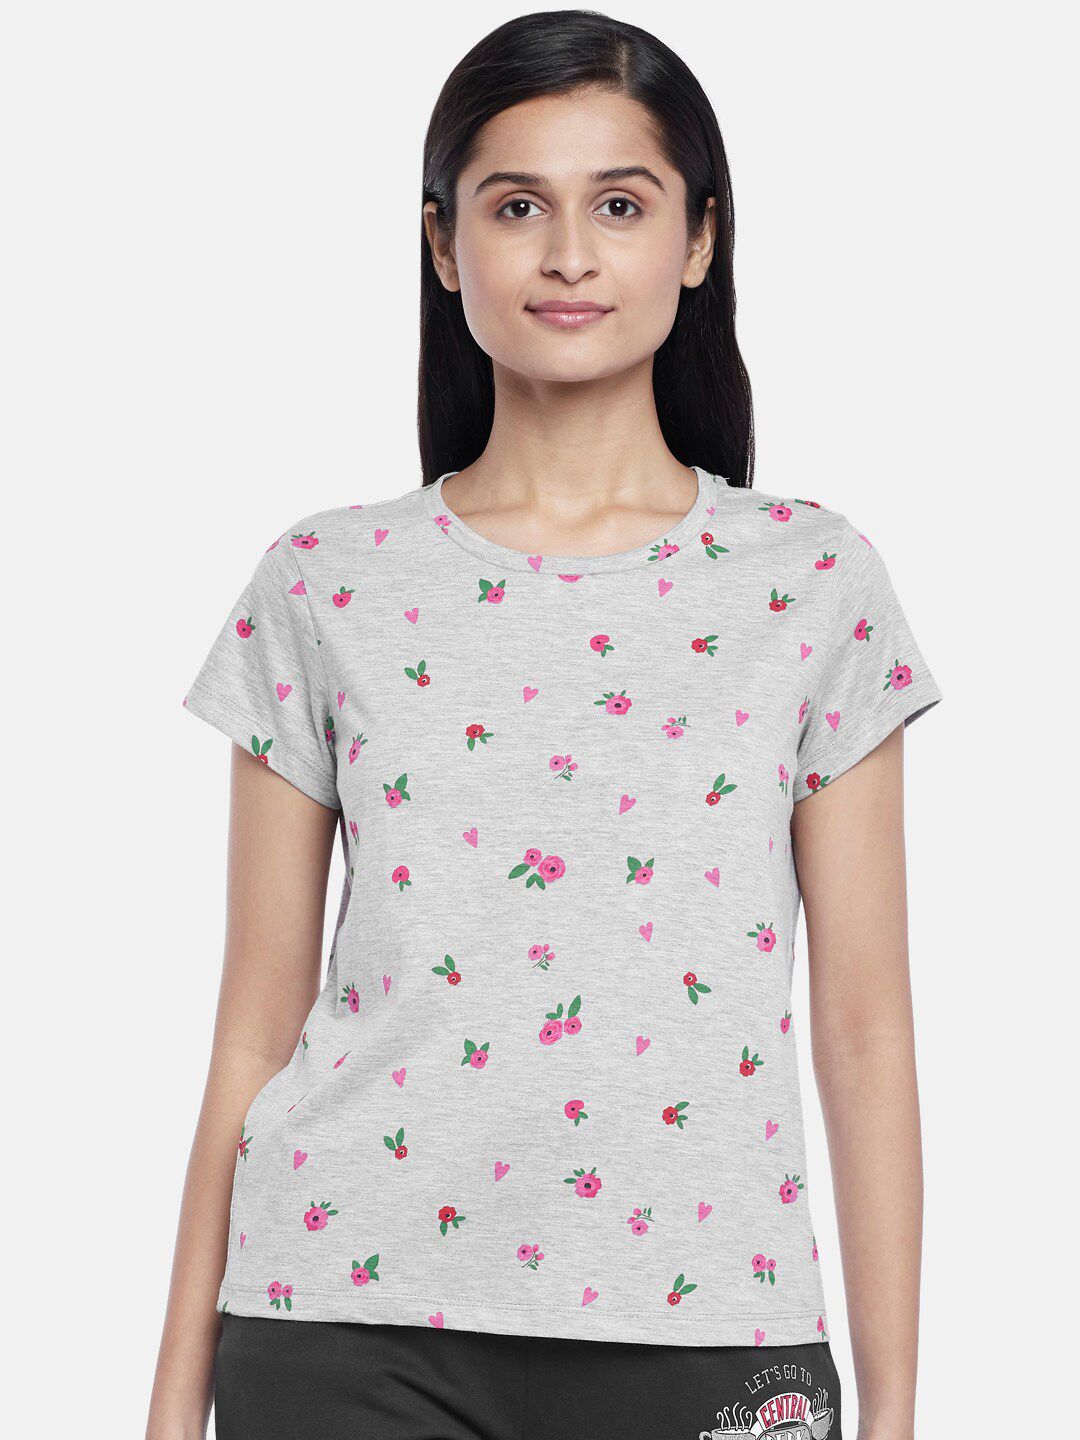 Dreamz by Pantaloons Women Grey & Pink Floral Print Pure Cotton Lounge T-Shirt Price in India